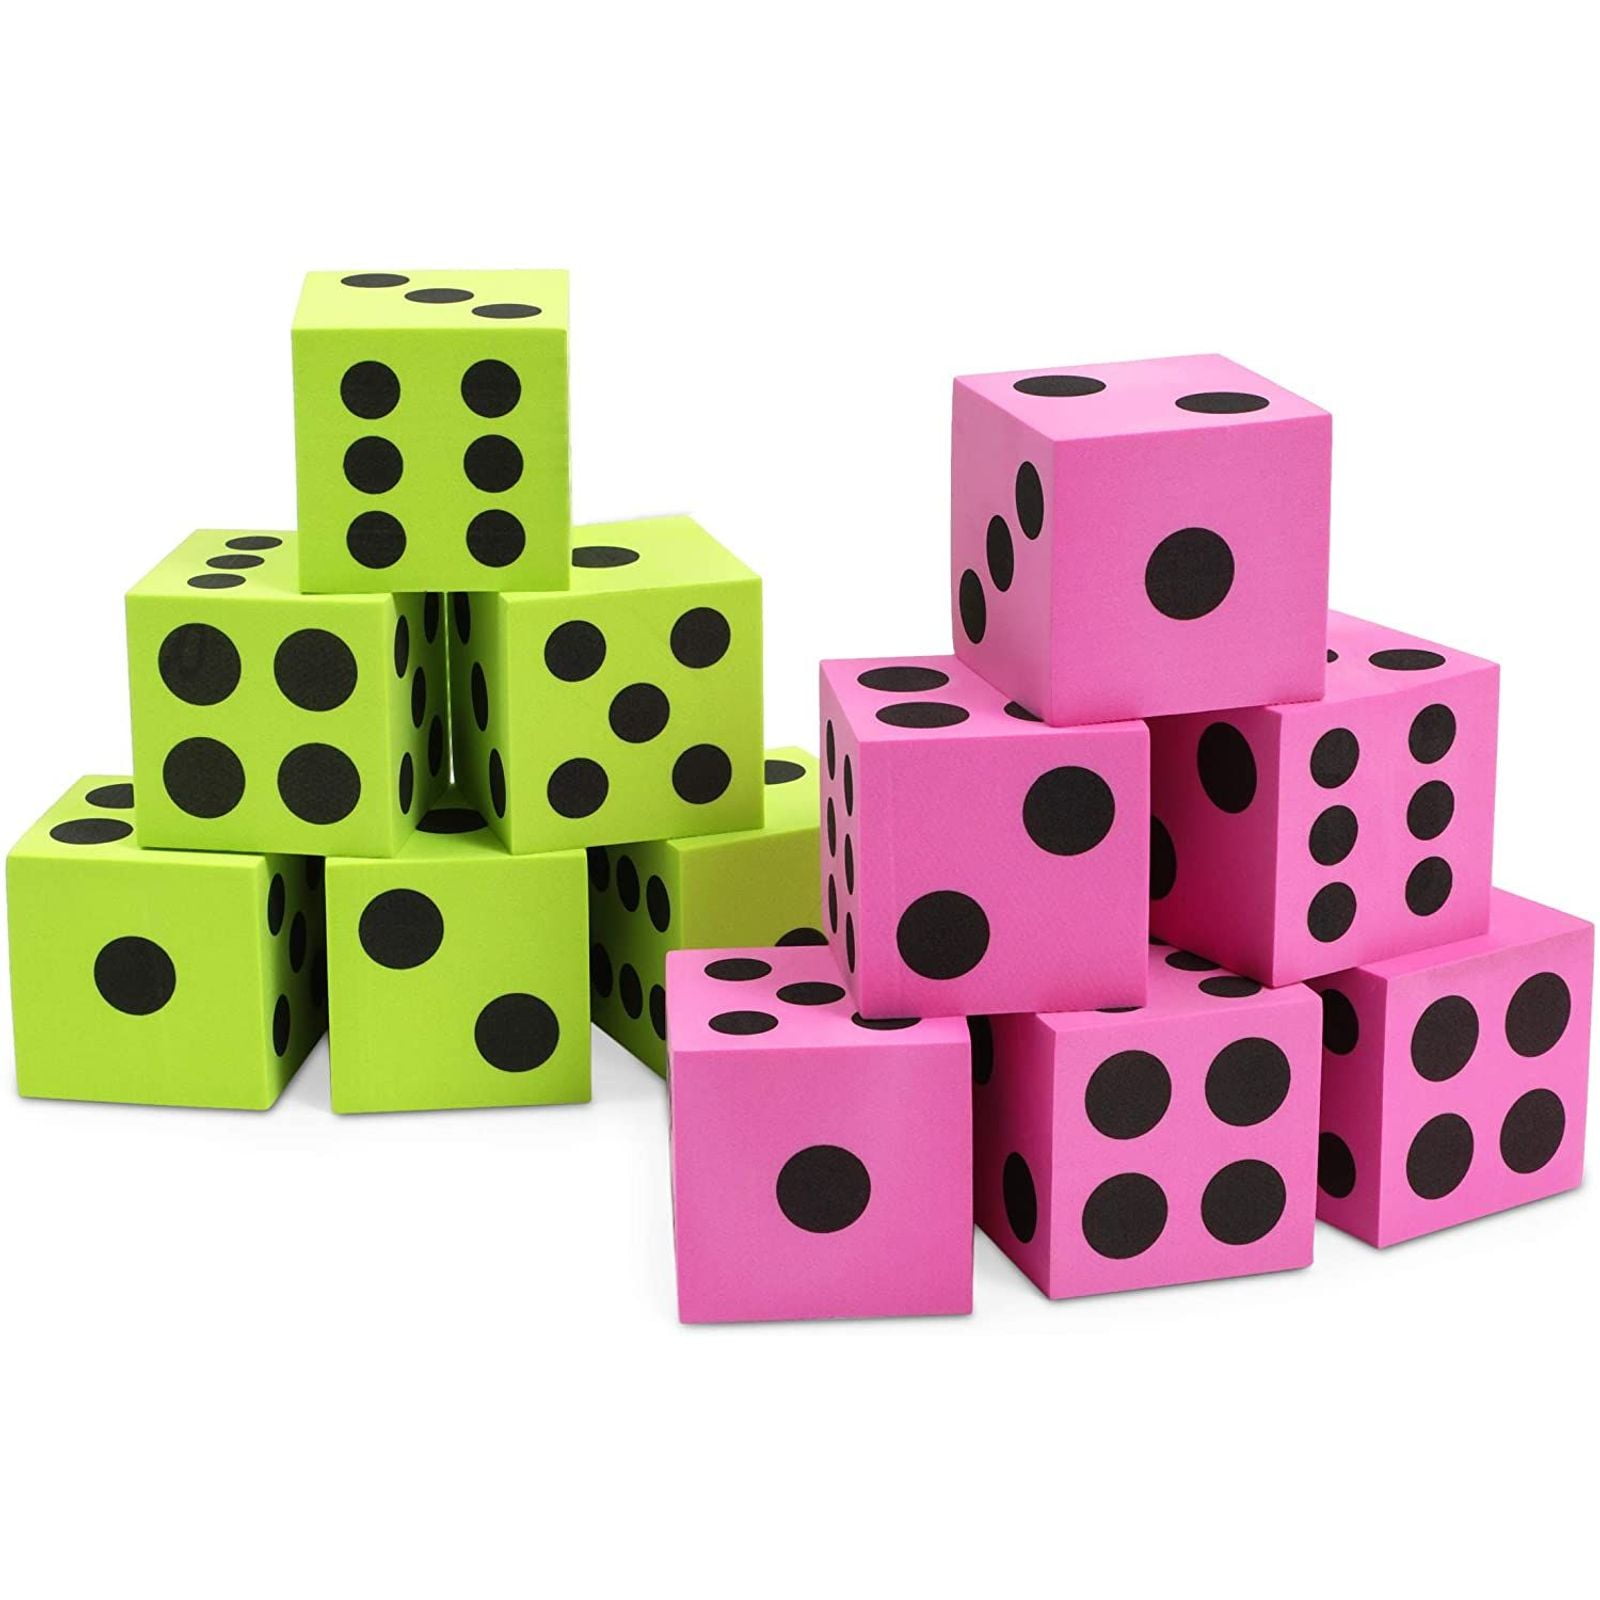 Lot of 12 Assorted Colored Extra Large Foam Dice 2.5" D6 Gaming Casino 